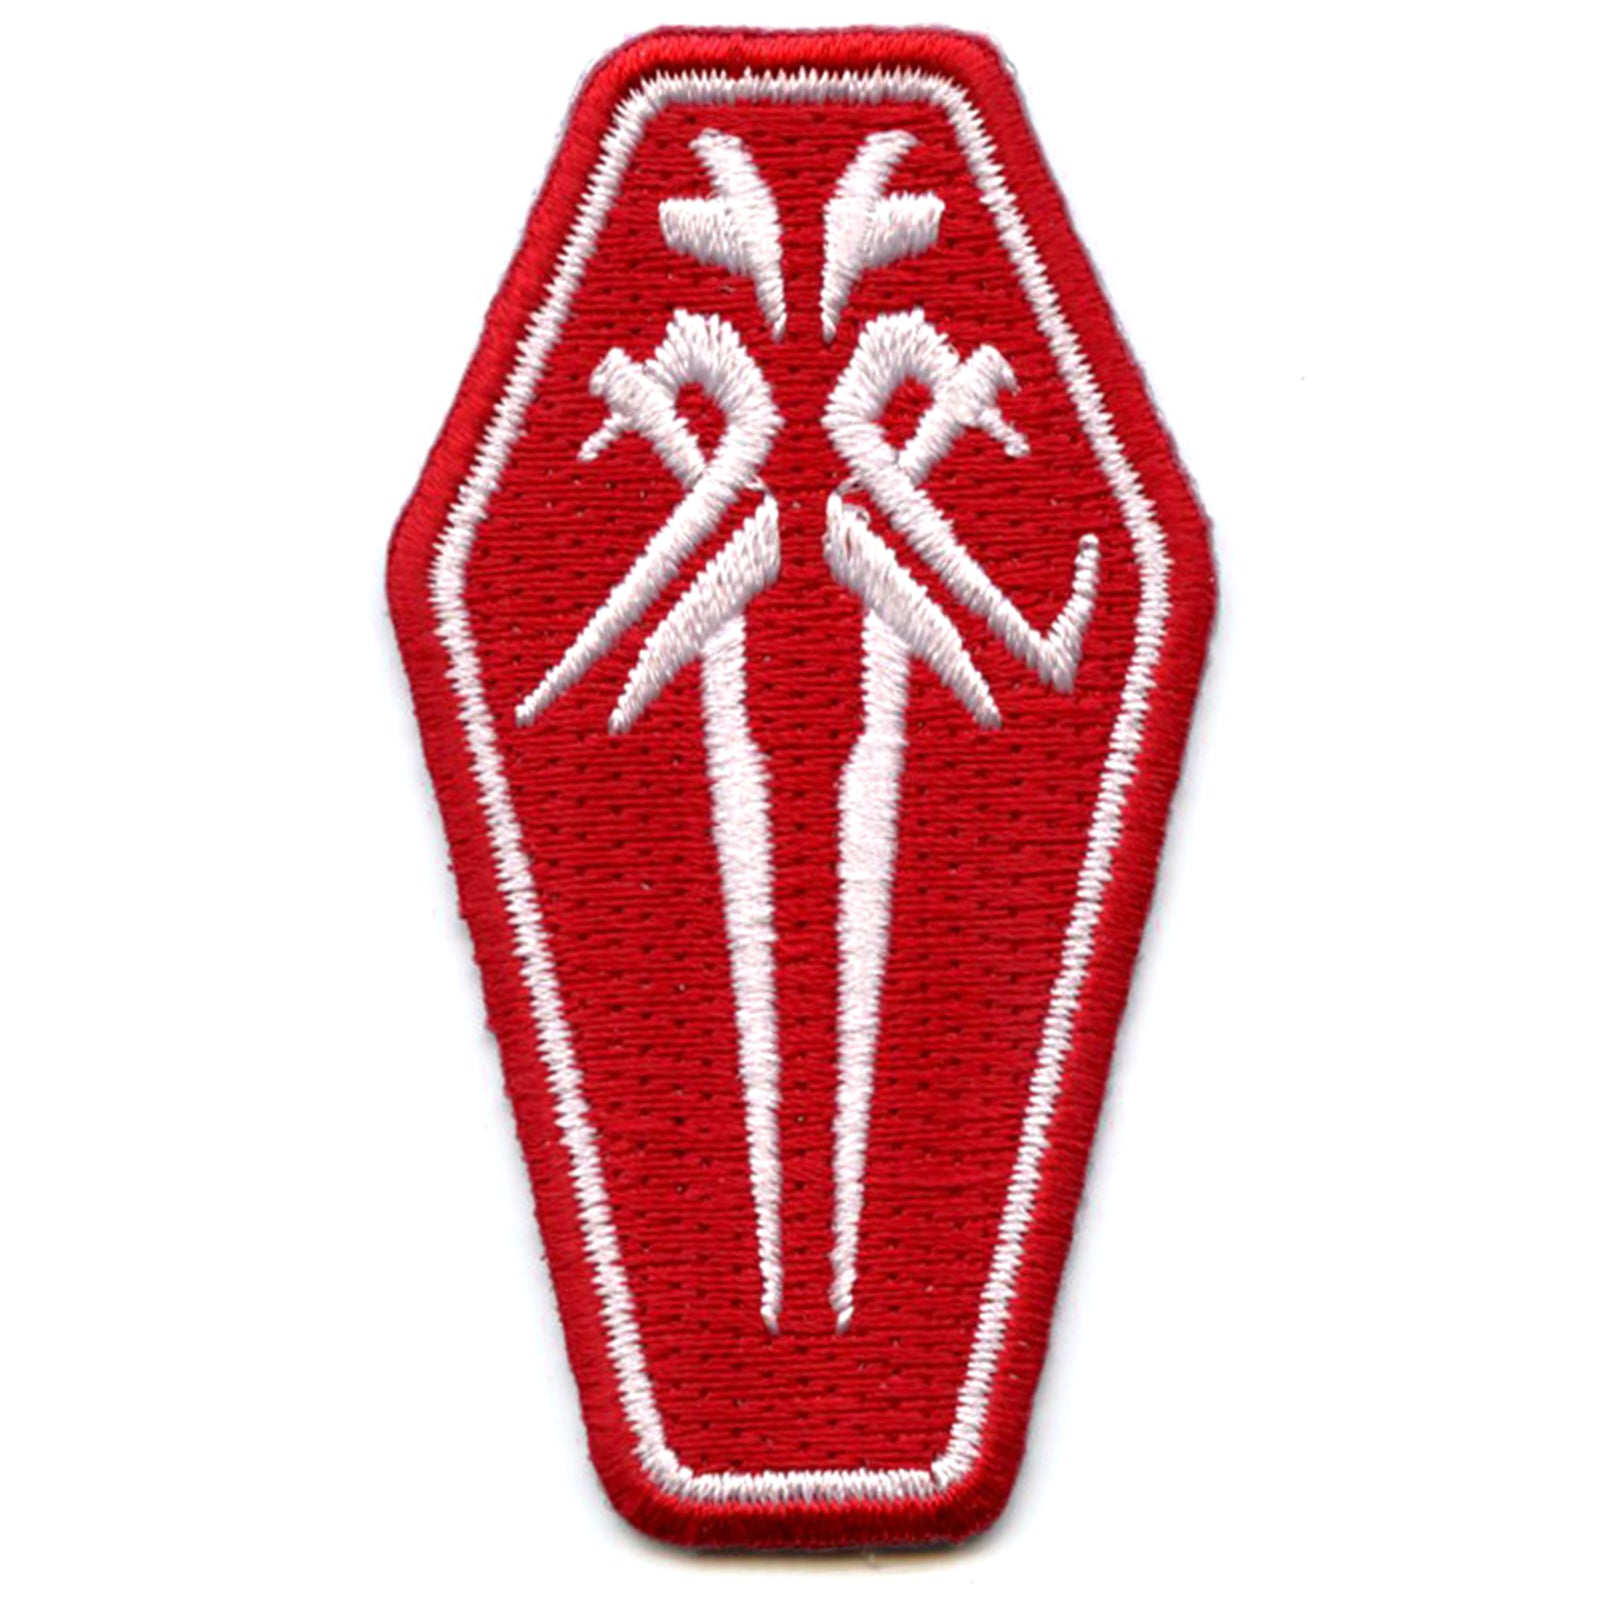 Guilty Crown Anime Funeral Parlor Embroidered Patch 